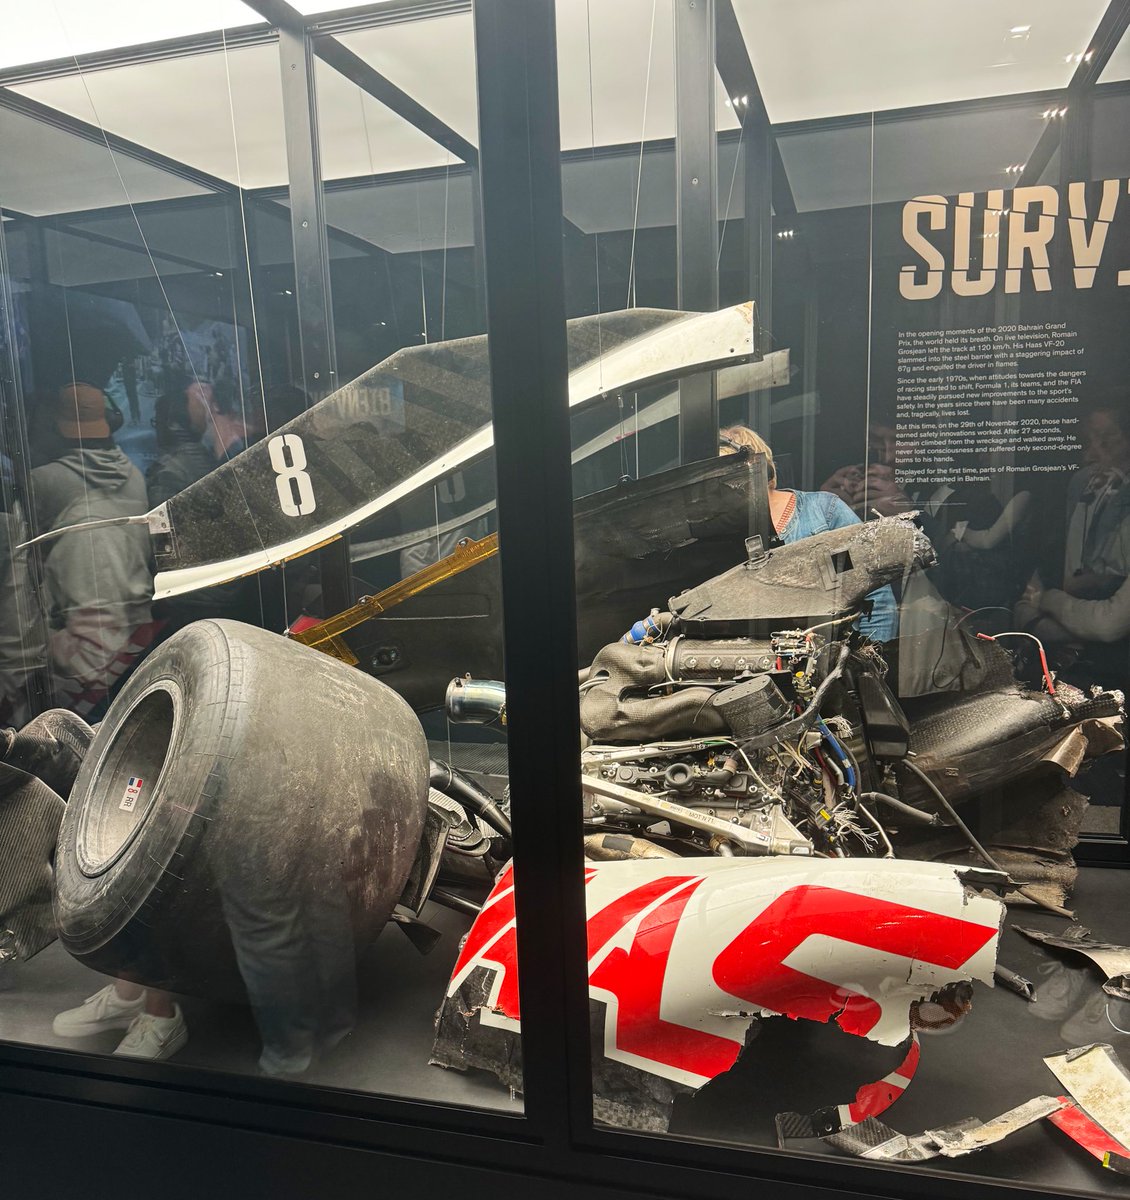 Remains of Romain Grosjean’s Haas from his fiery crash in Bahrain are here too. Pretty surreal.